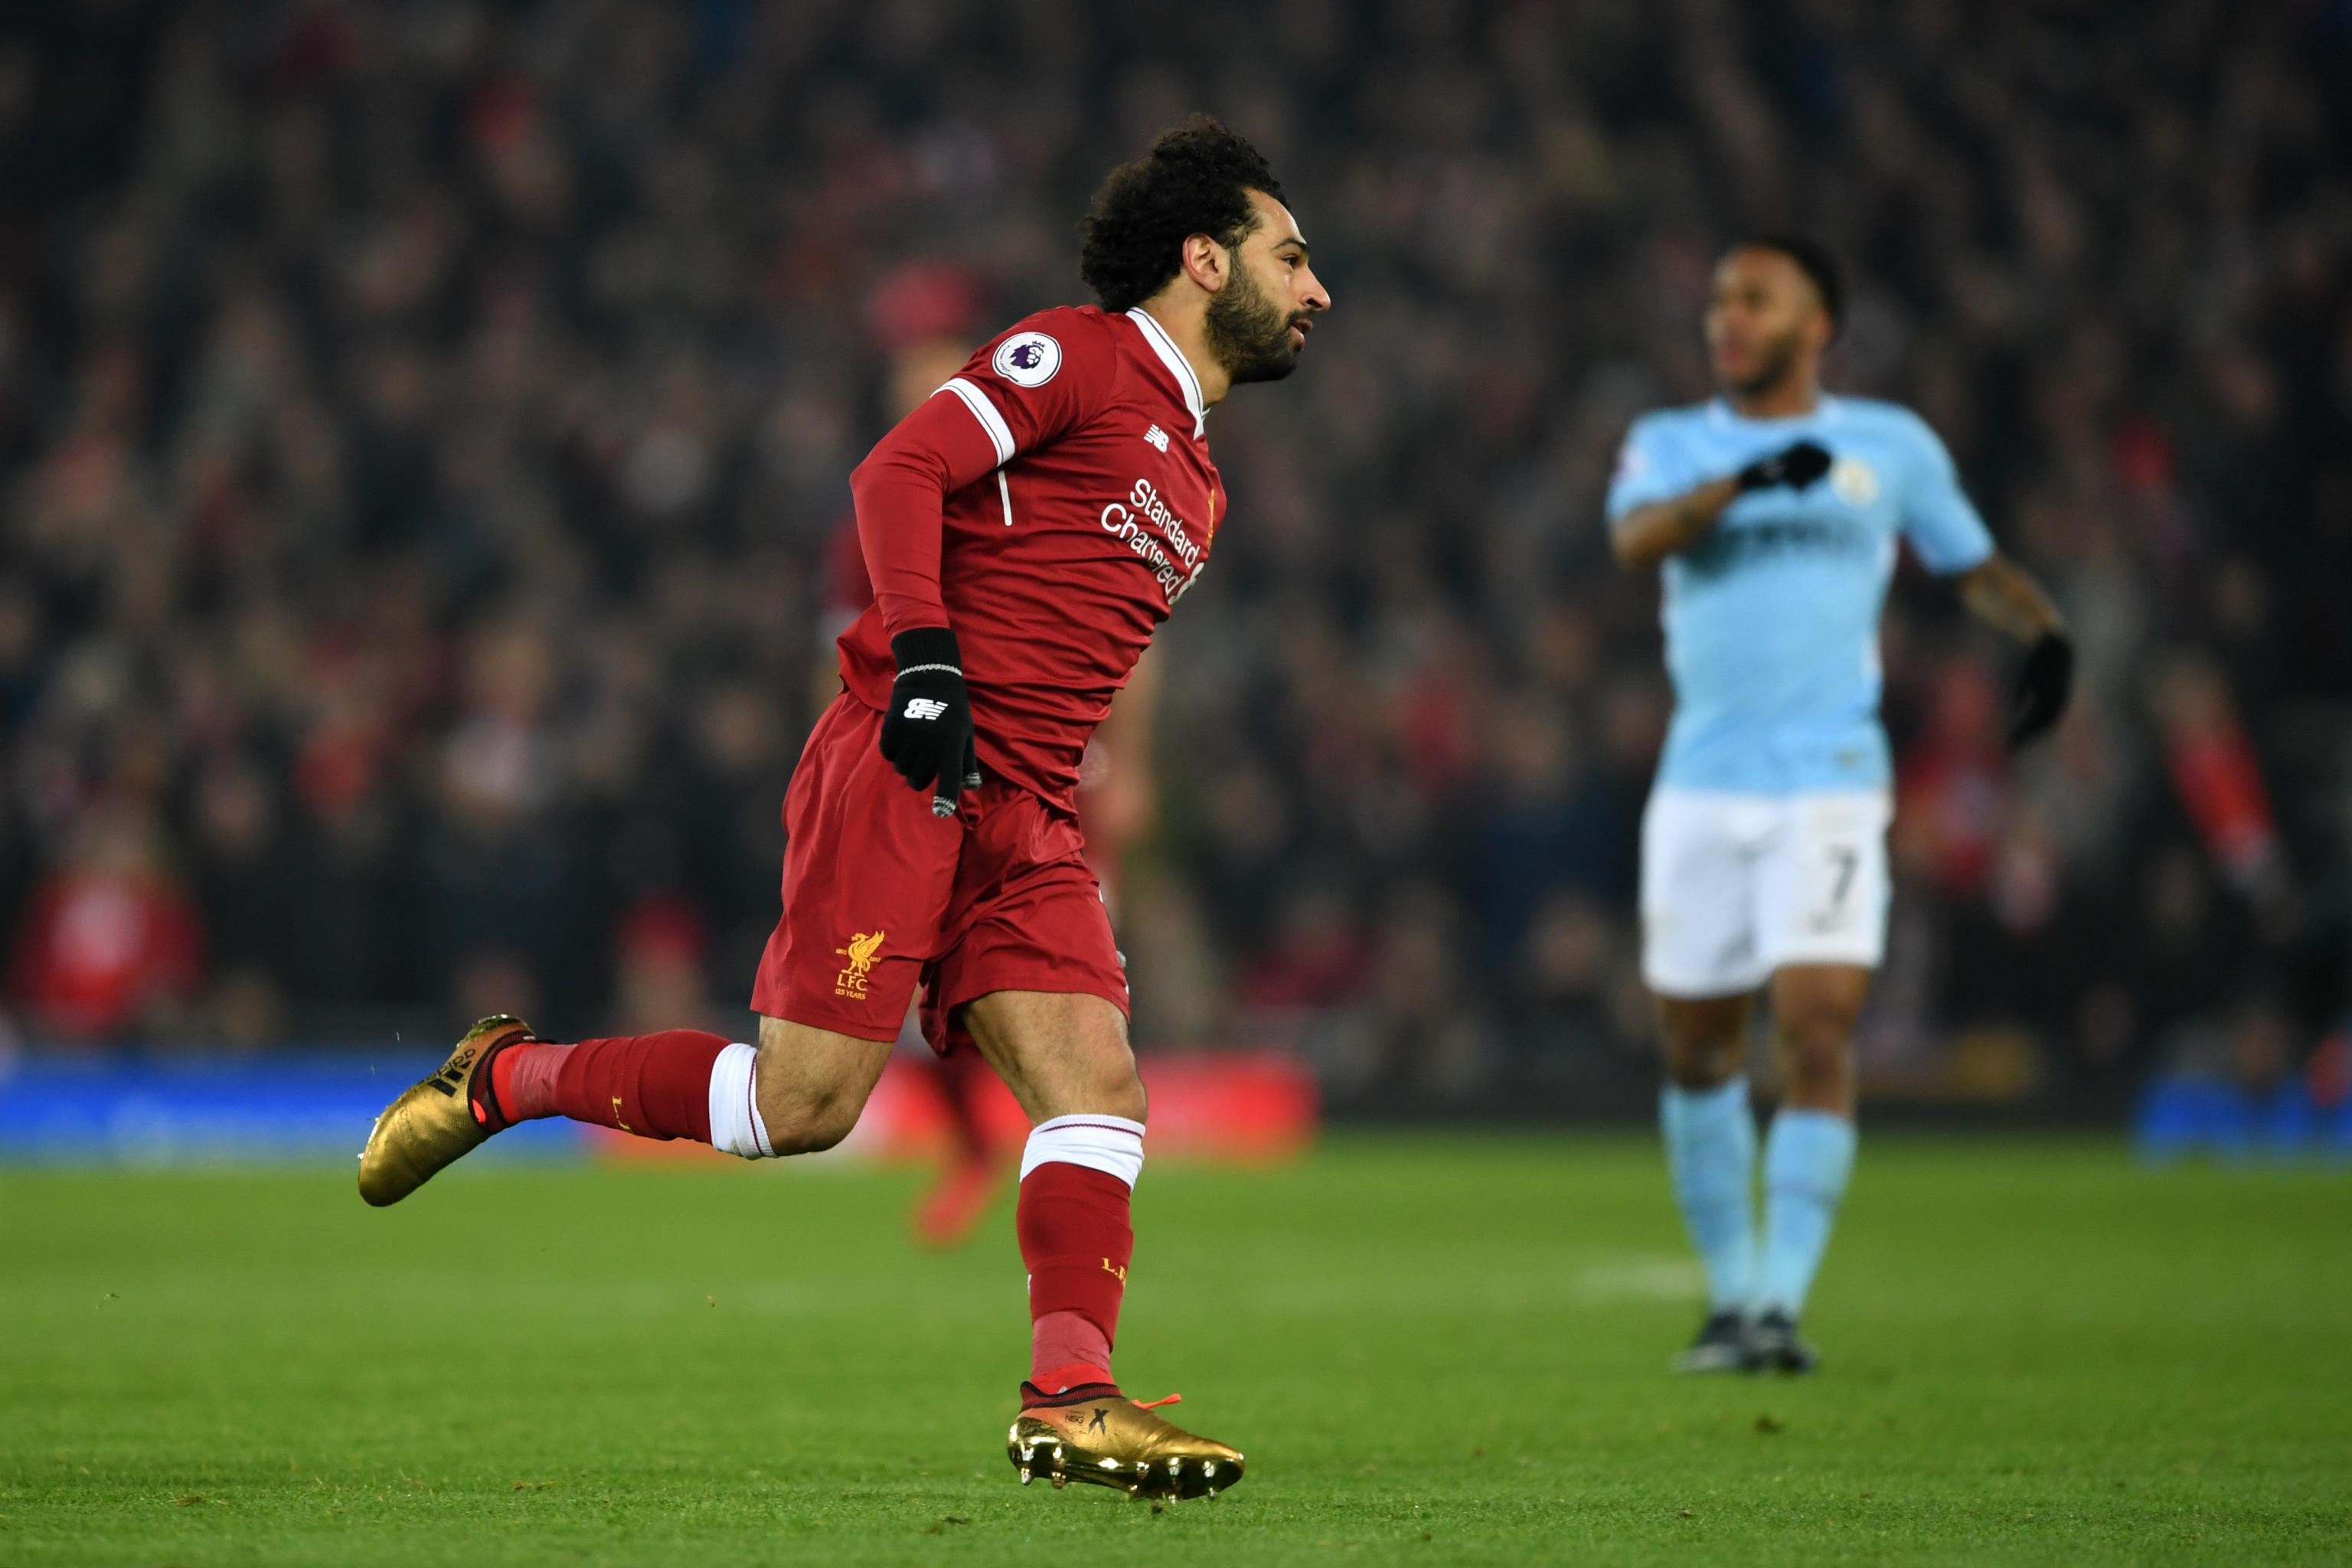 Liverpool vs. Manchester City: Preview, Live Stream, TV Info for UCL Match